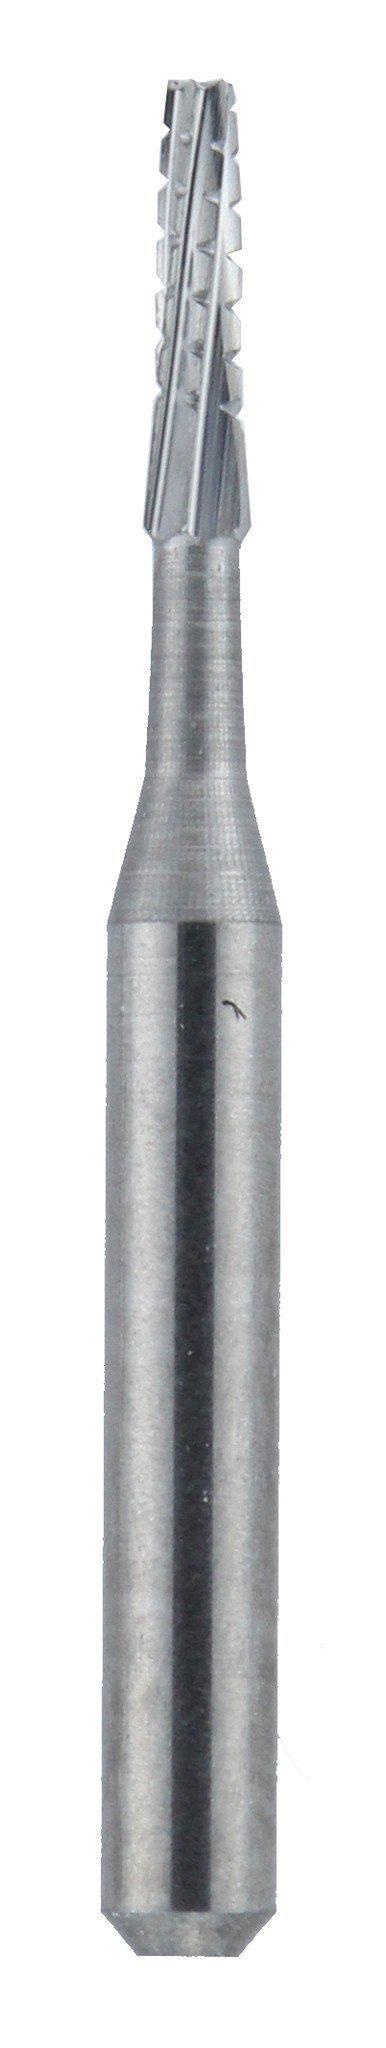 FGSS700-1 (Short Shank) Dentalree Solid Carbide 1-Piece. Made in USA